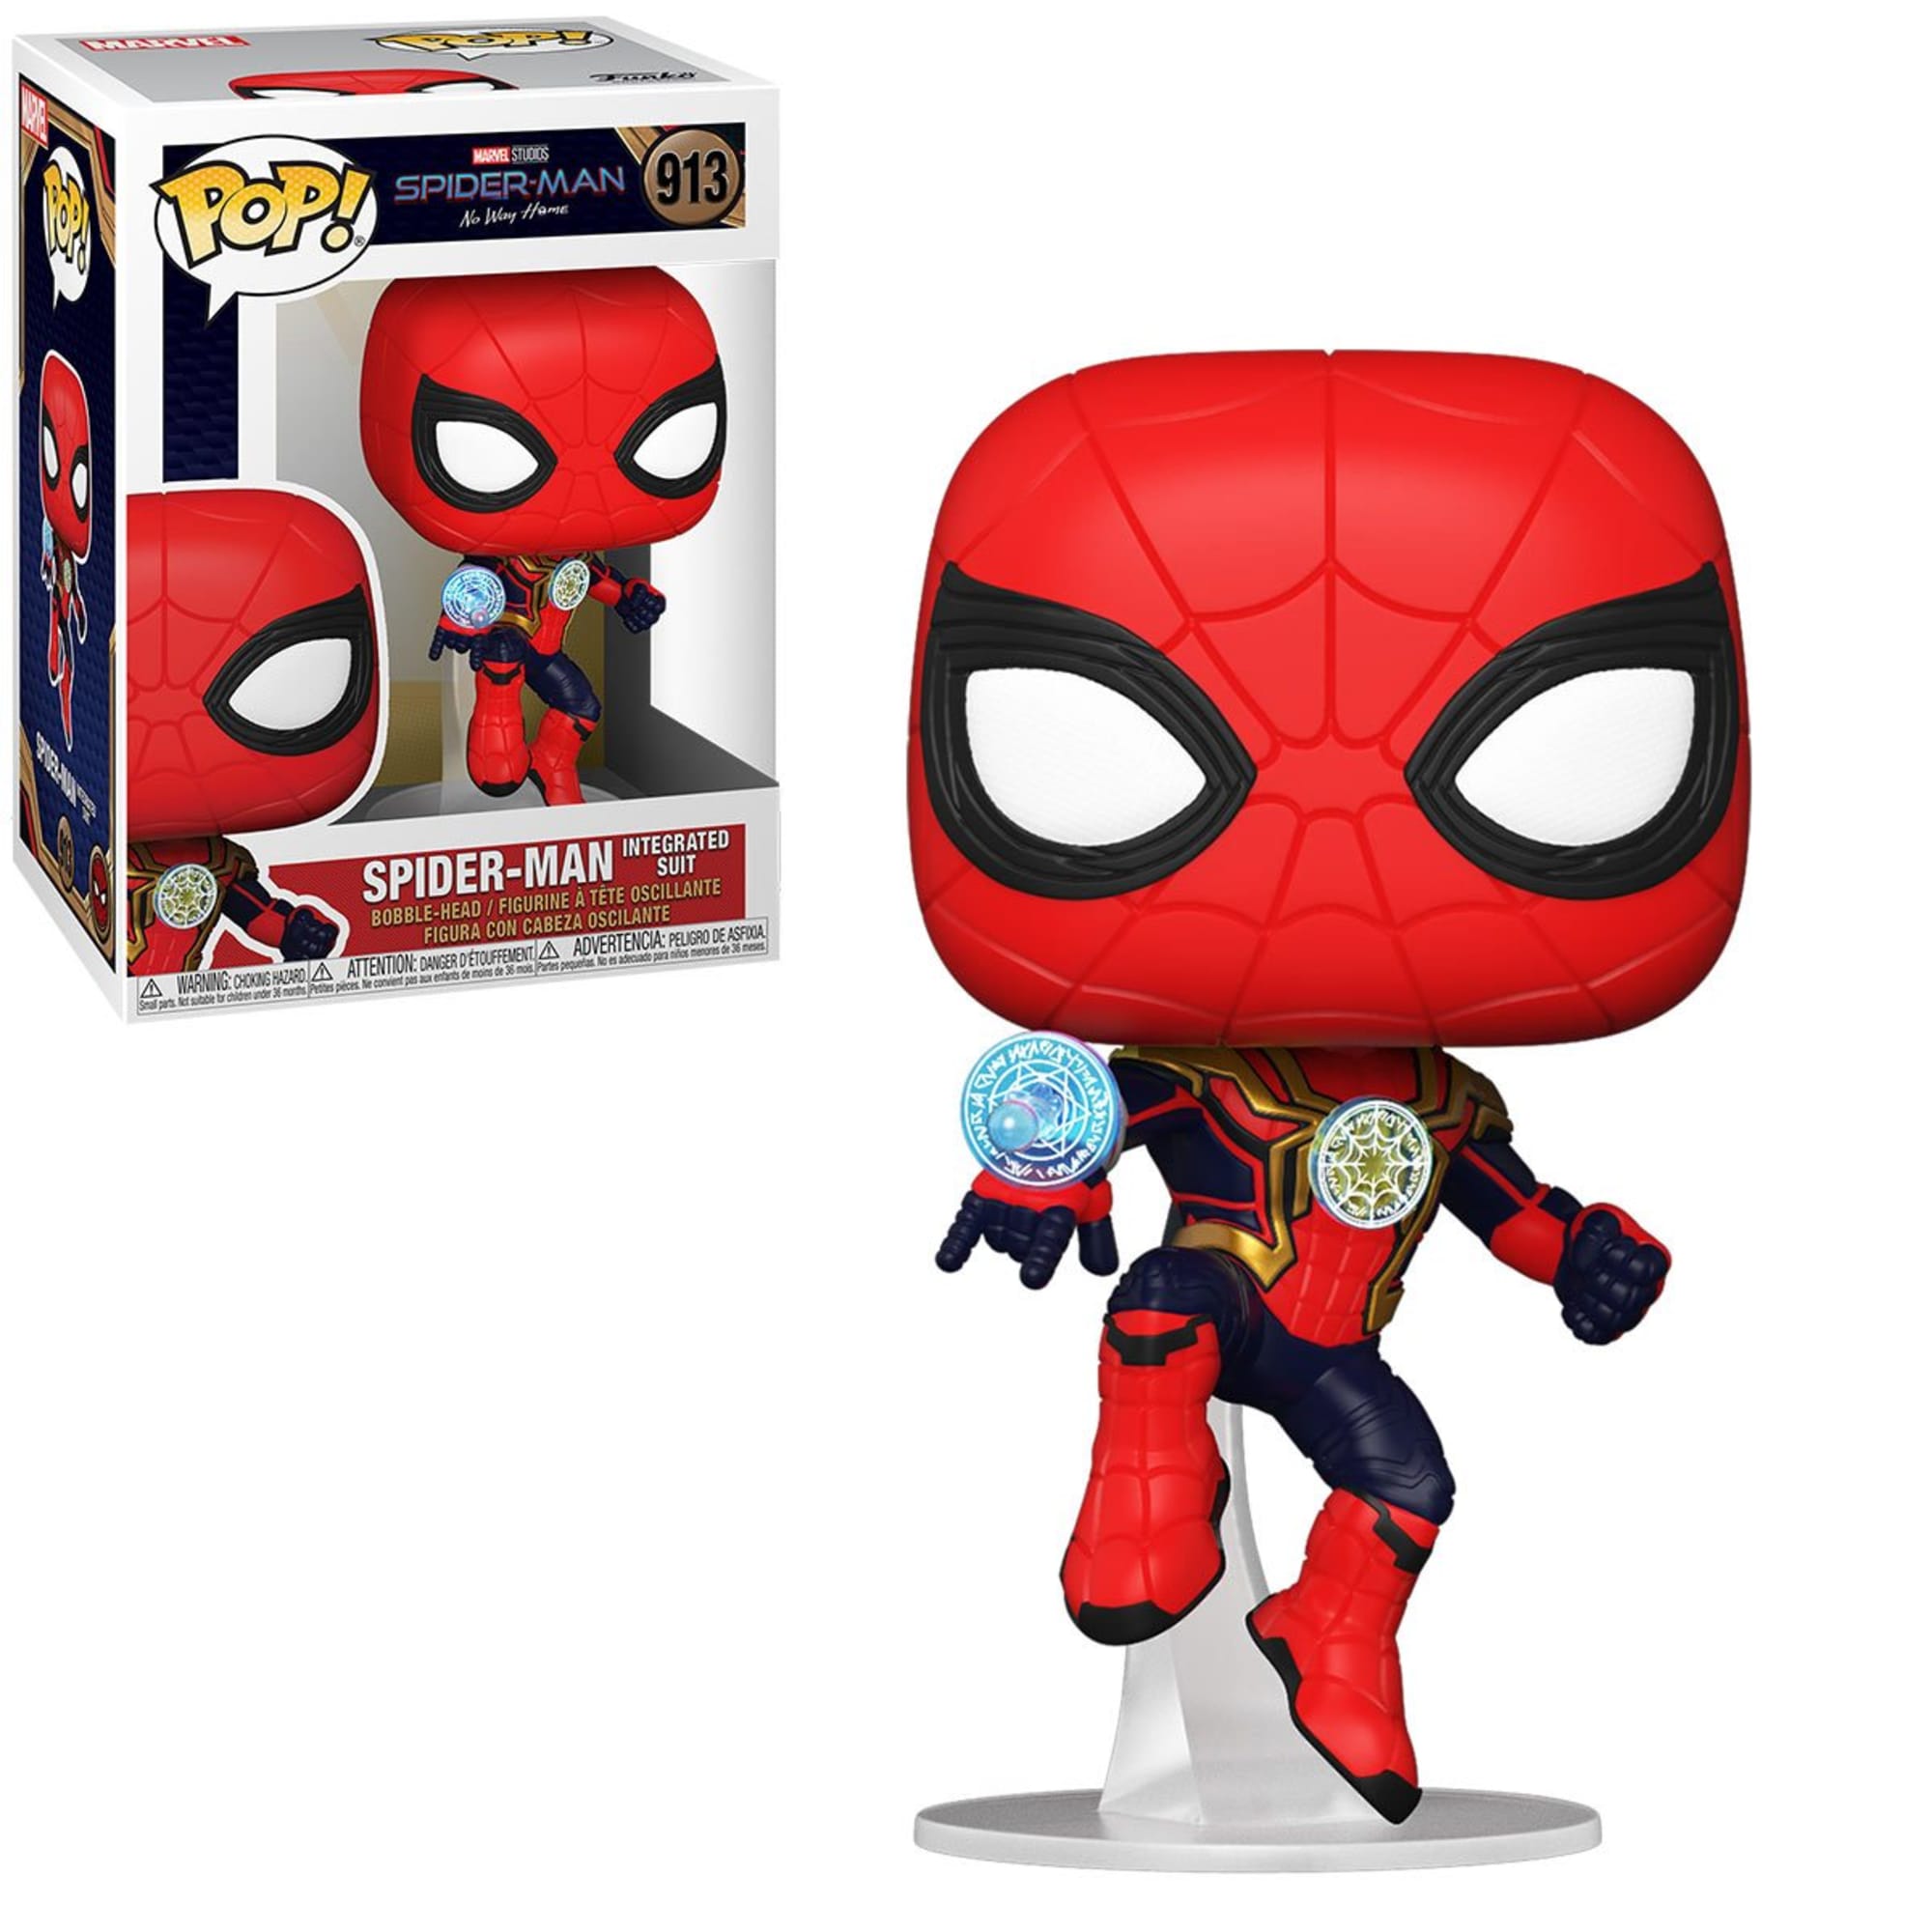 Get excited for Spider-Man: No Way Home with new Funko Pop! figures